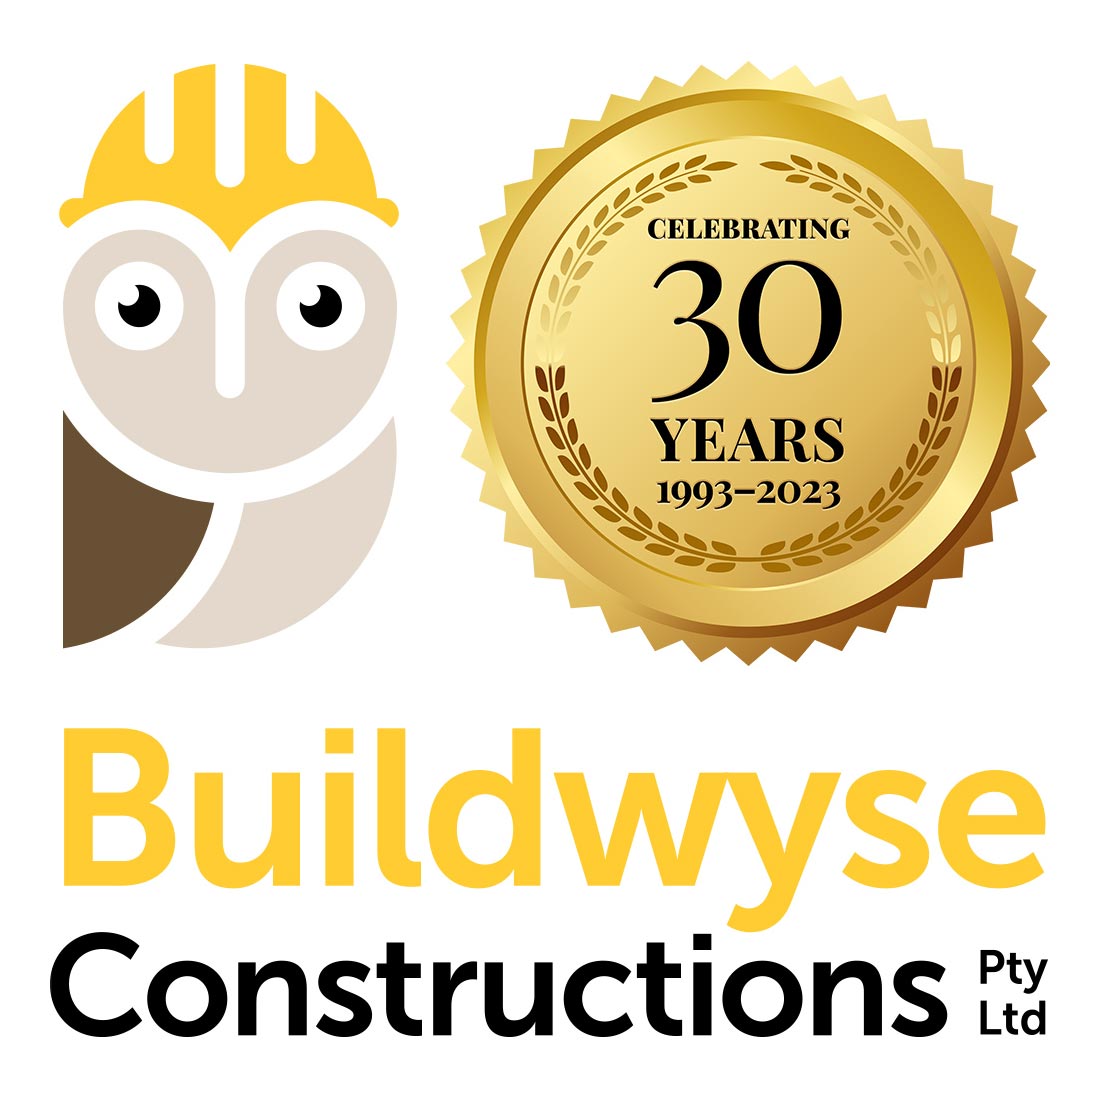 Buildwyse Constructions, Master Builders Association Member, celebrating 30 years in 2023